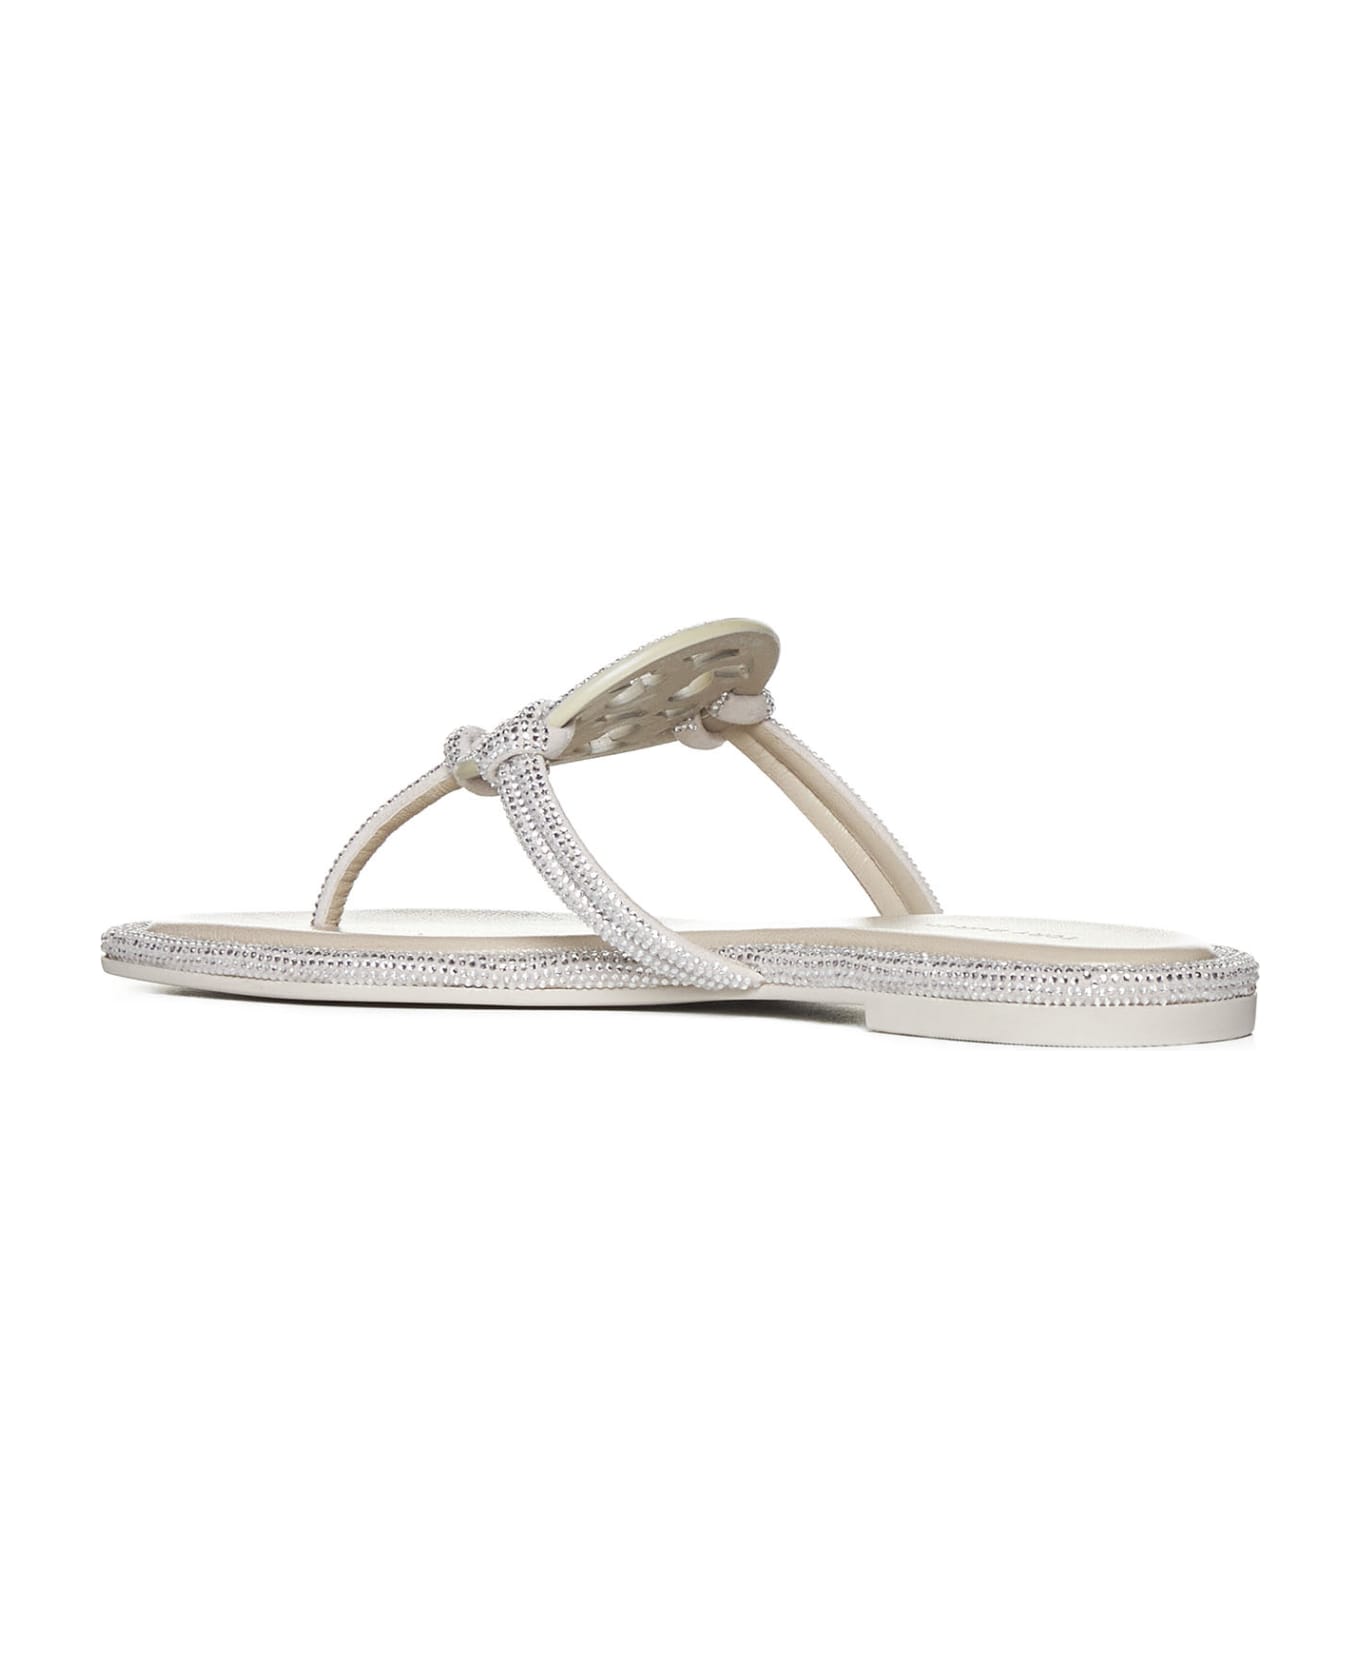 Tory Burch Miller Knotted Pave Sandals - Gray